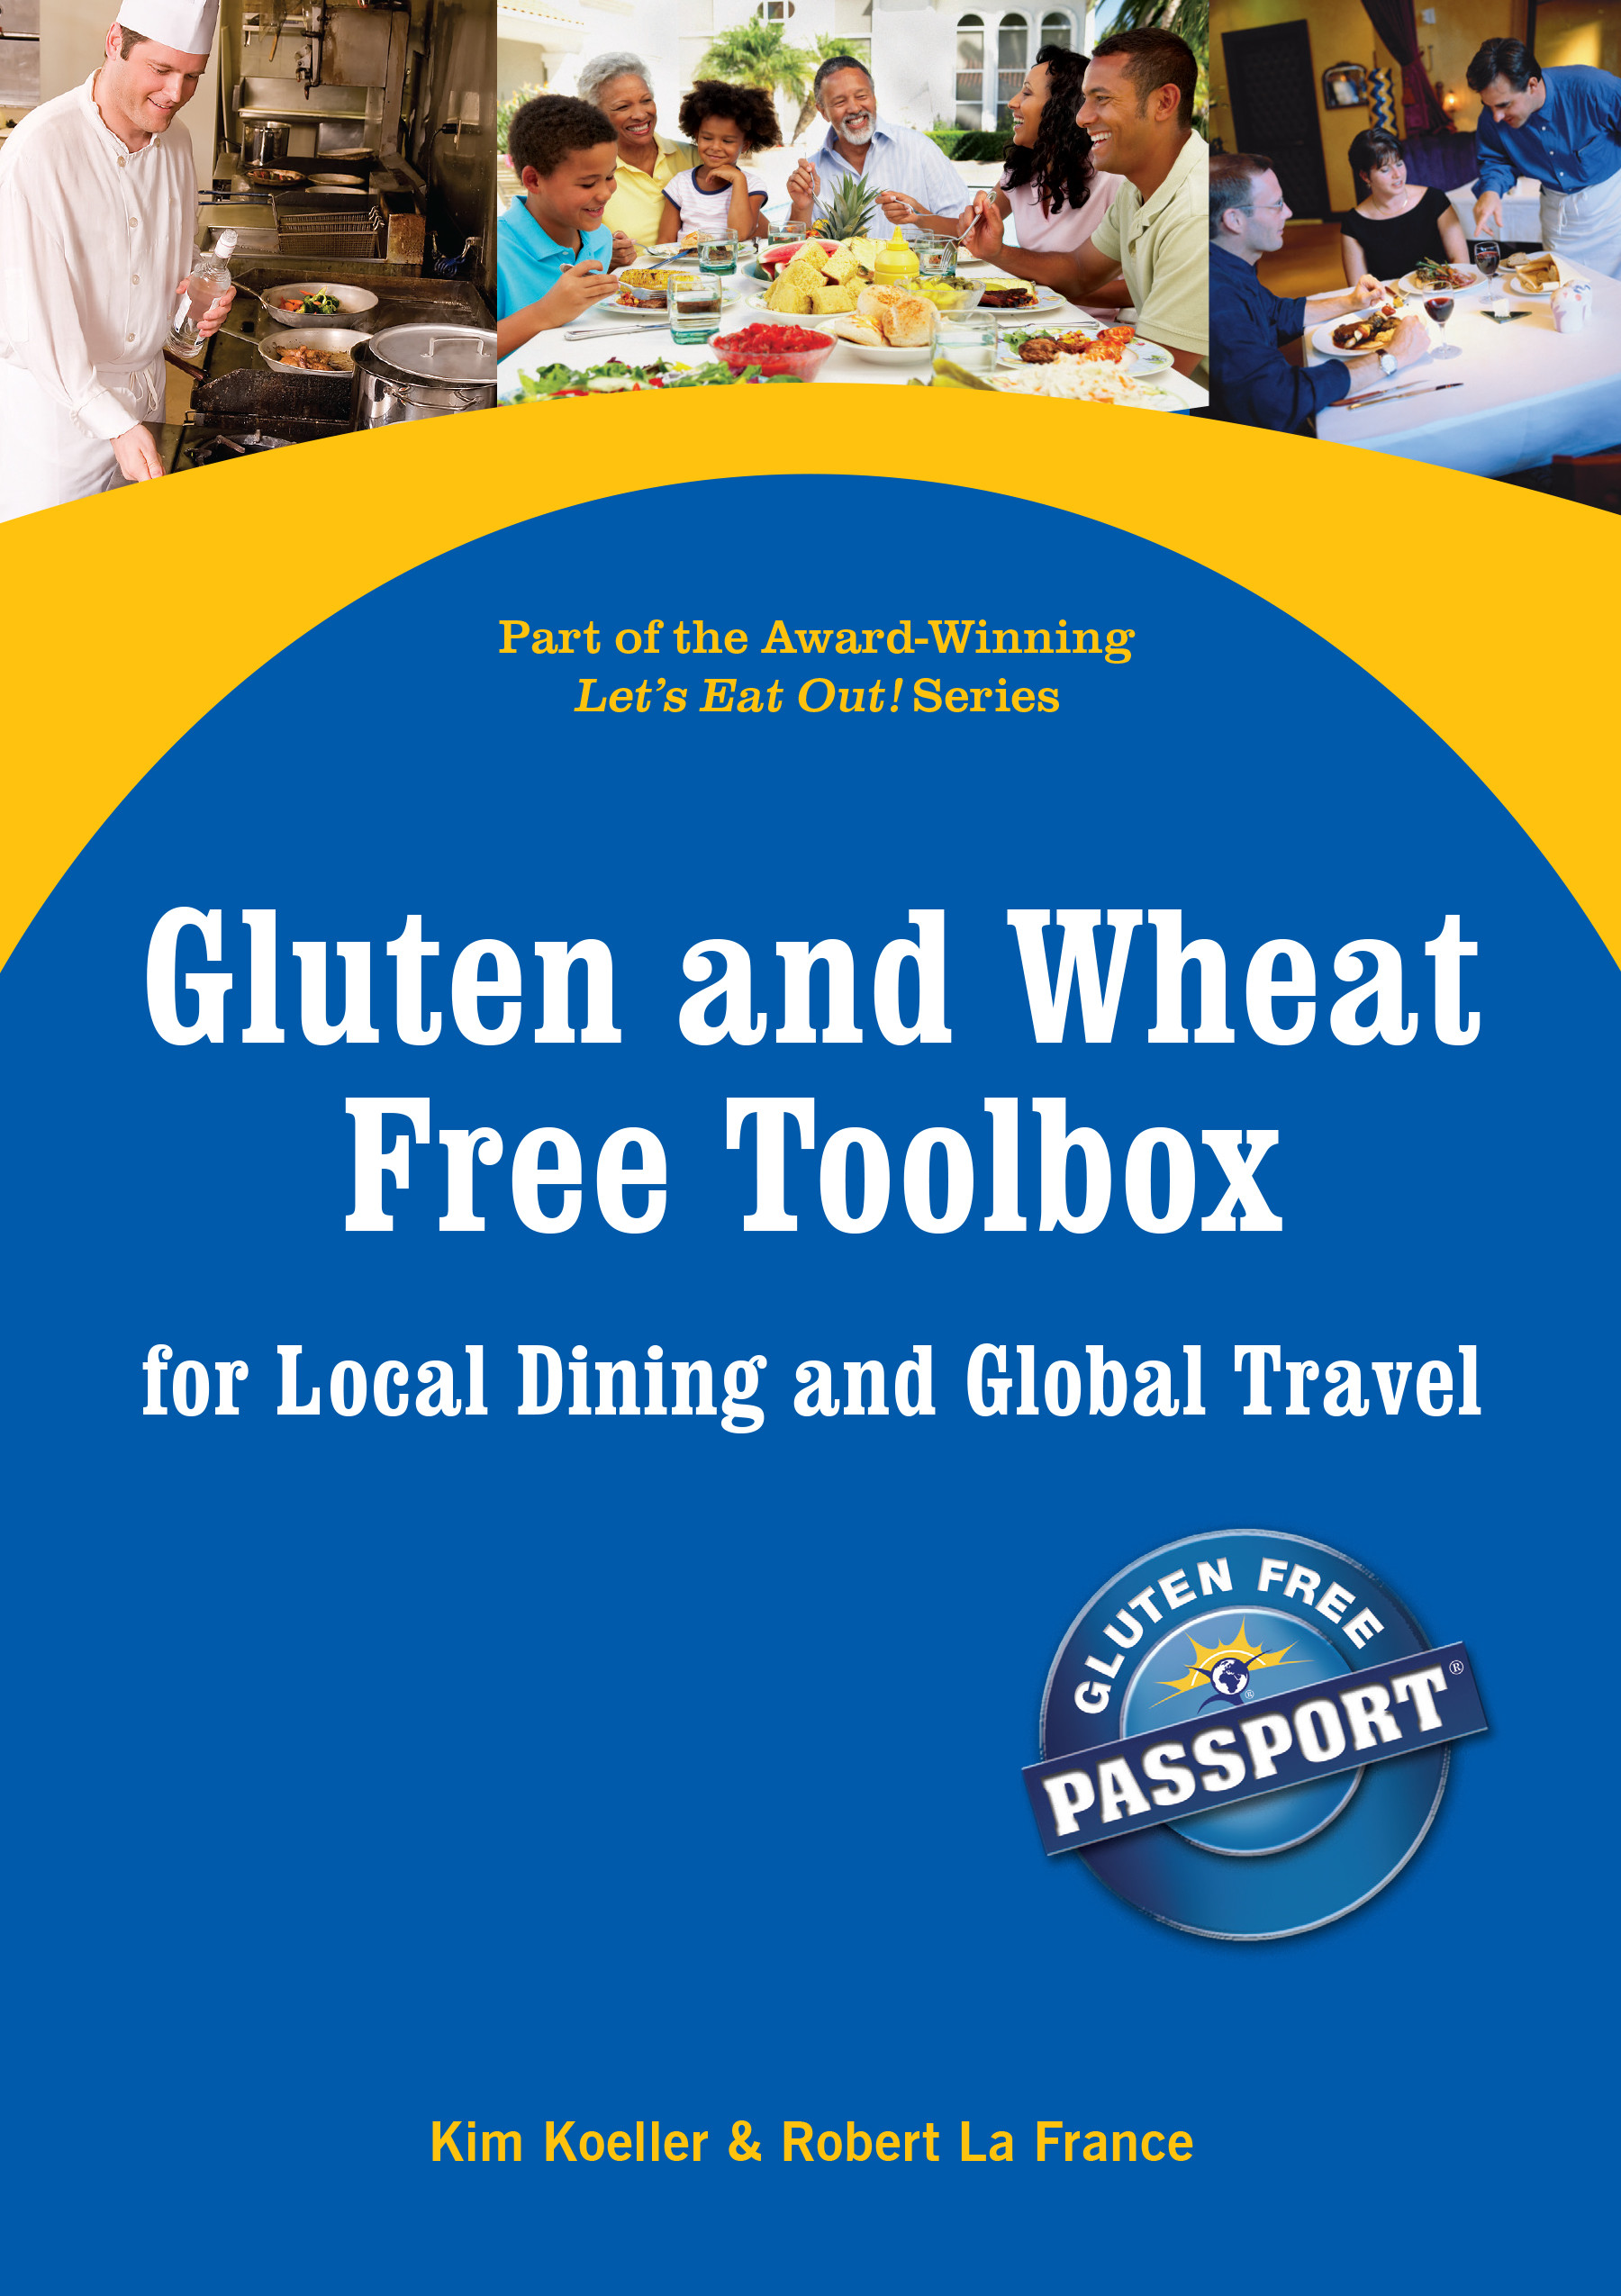 Gluten and Wheat Free Toolbox for Local Dining and Global Travel